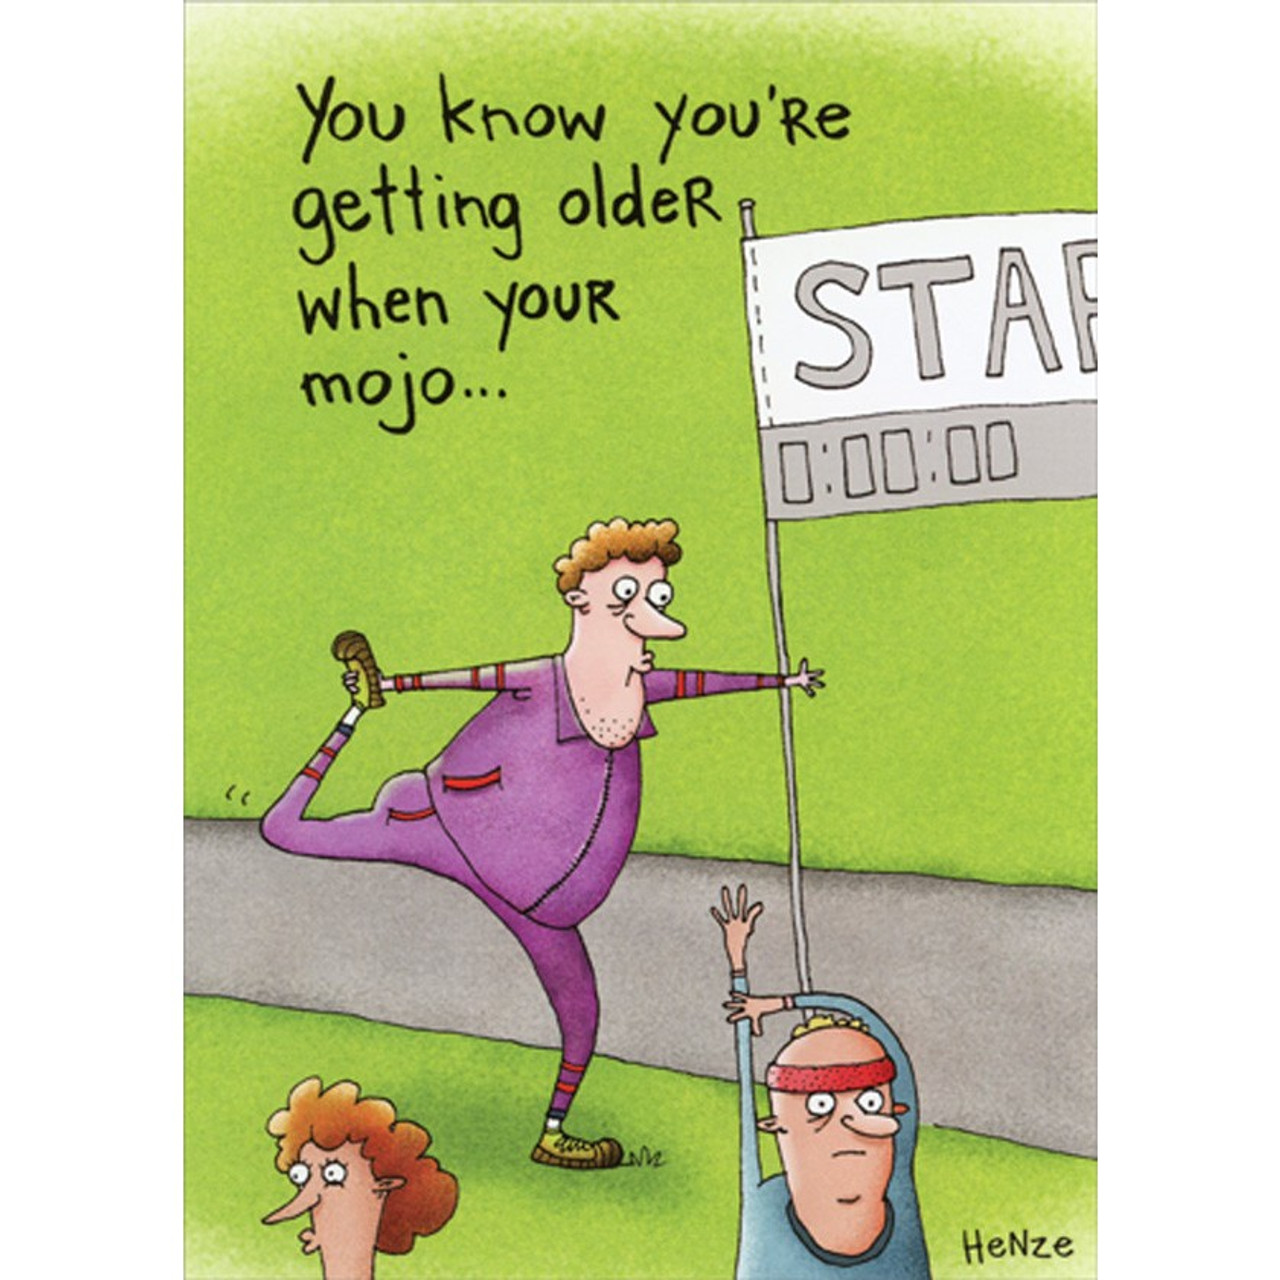 Runner Stretching at Start Line Humorous / Funny Birthday Card for Him ...